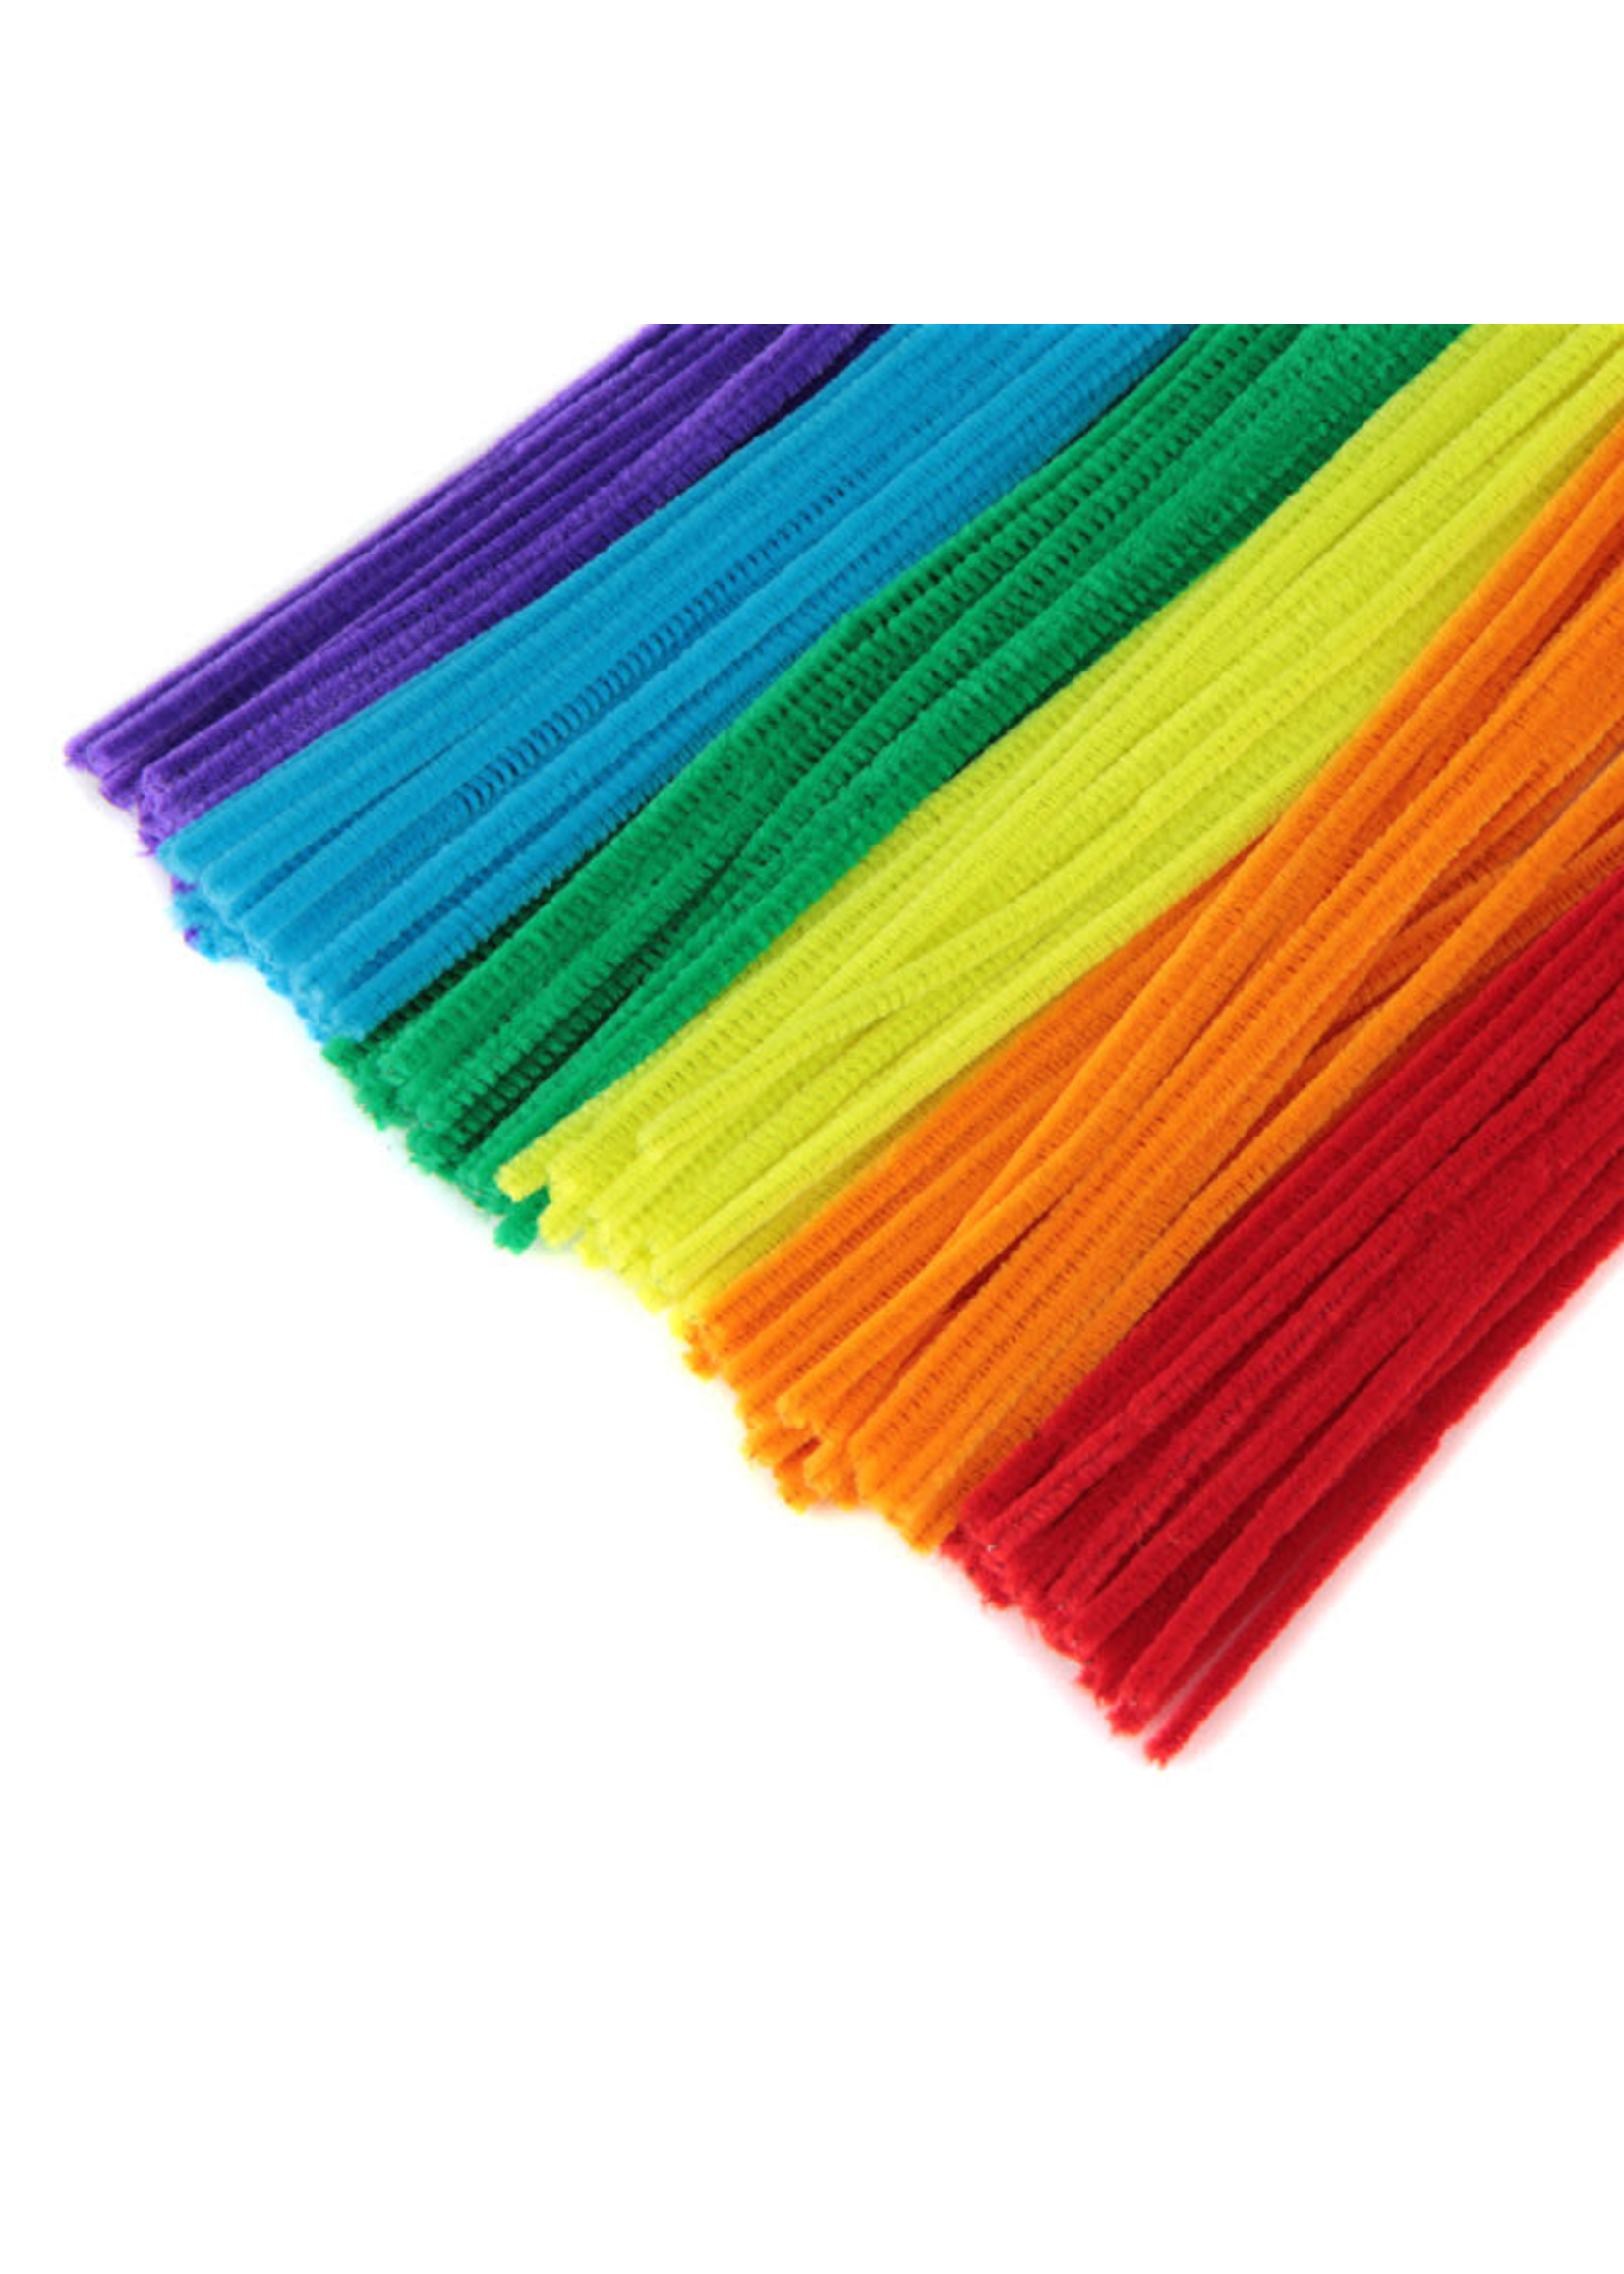 Chenille Stems Pipe Cleaners 10pc